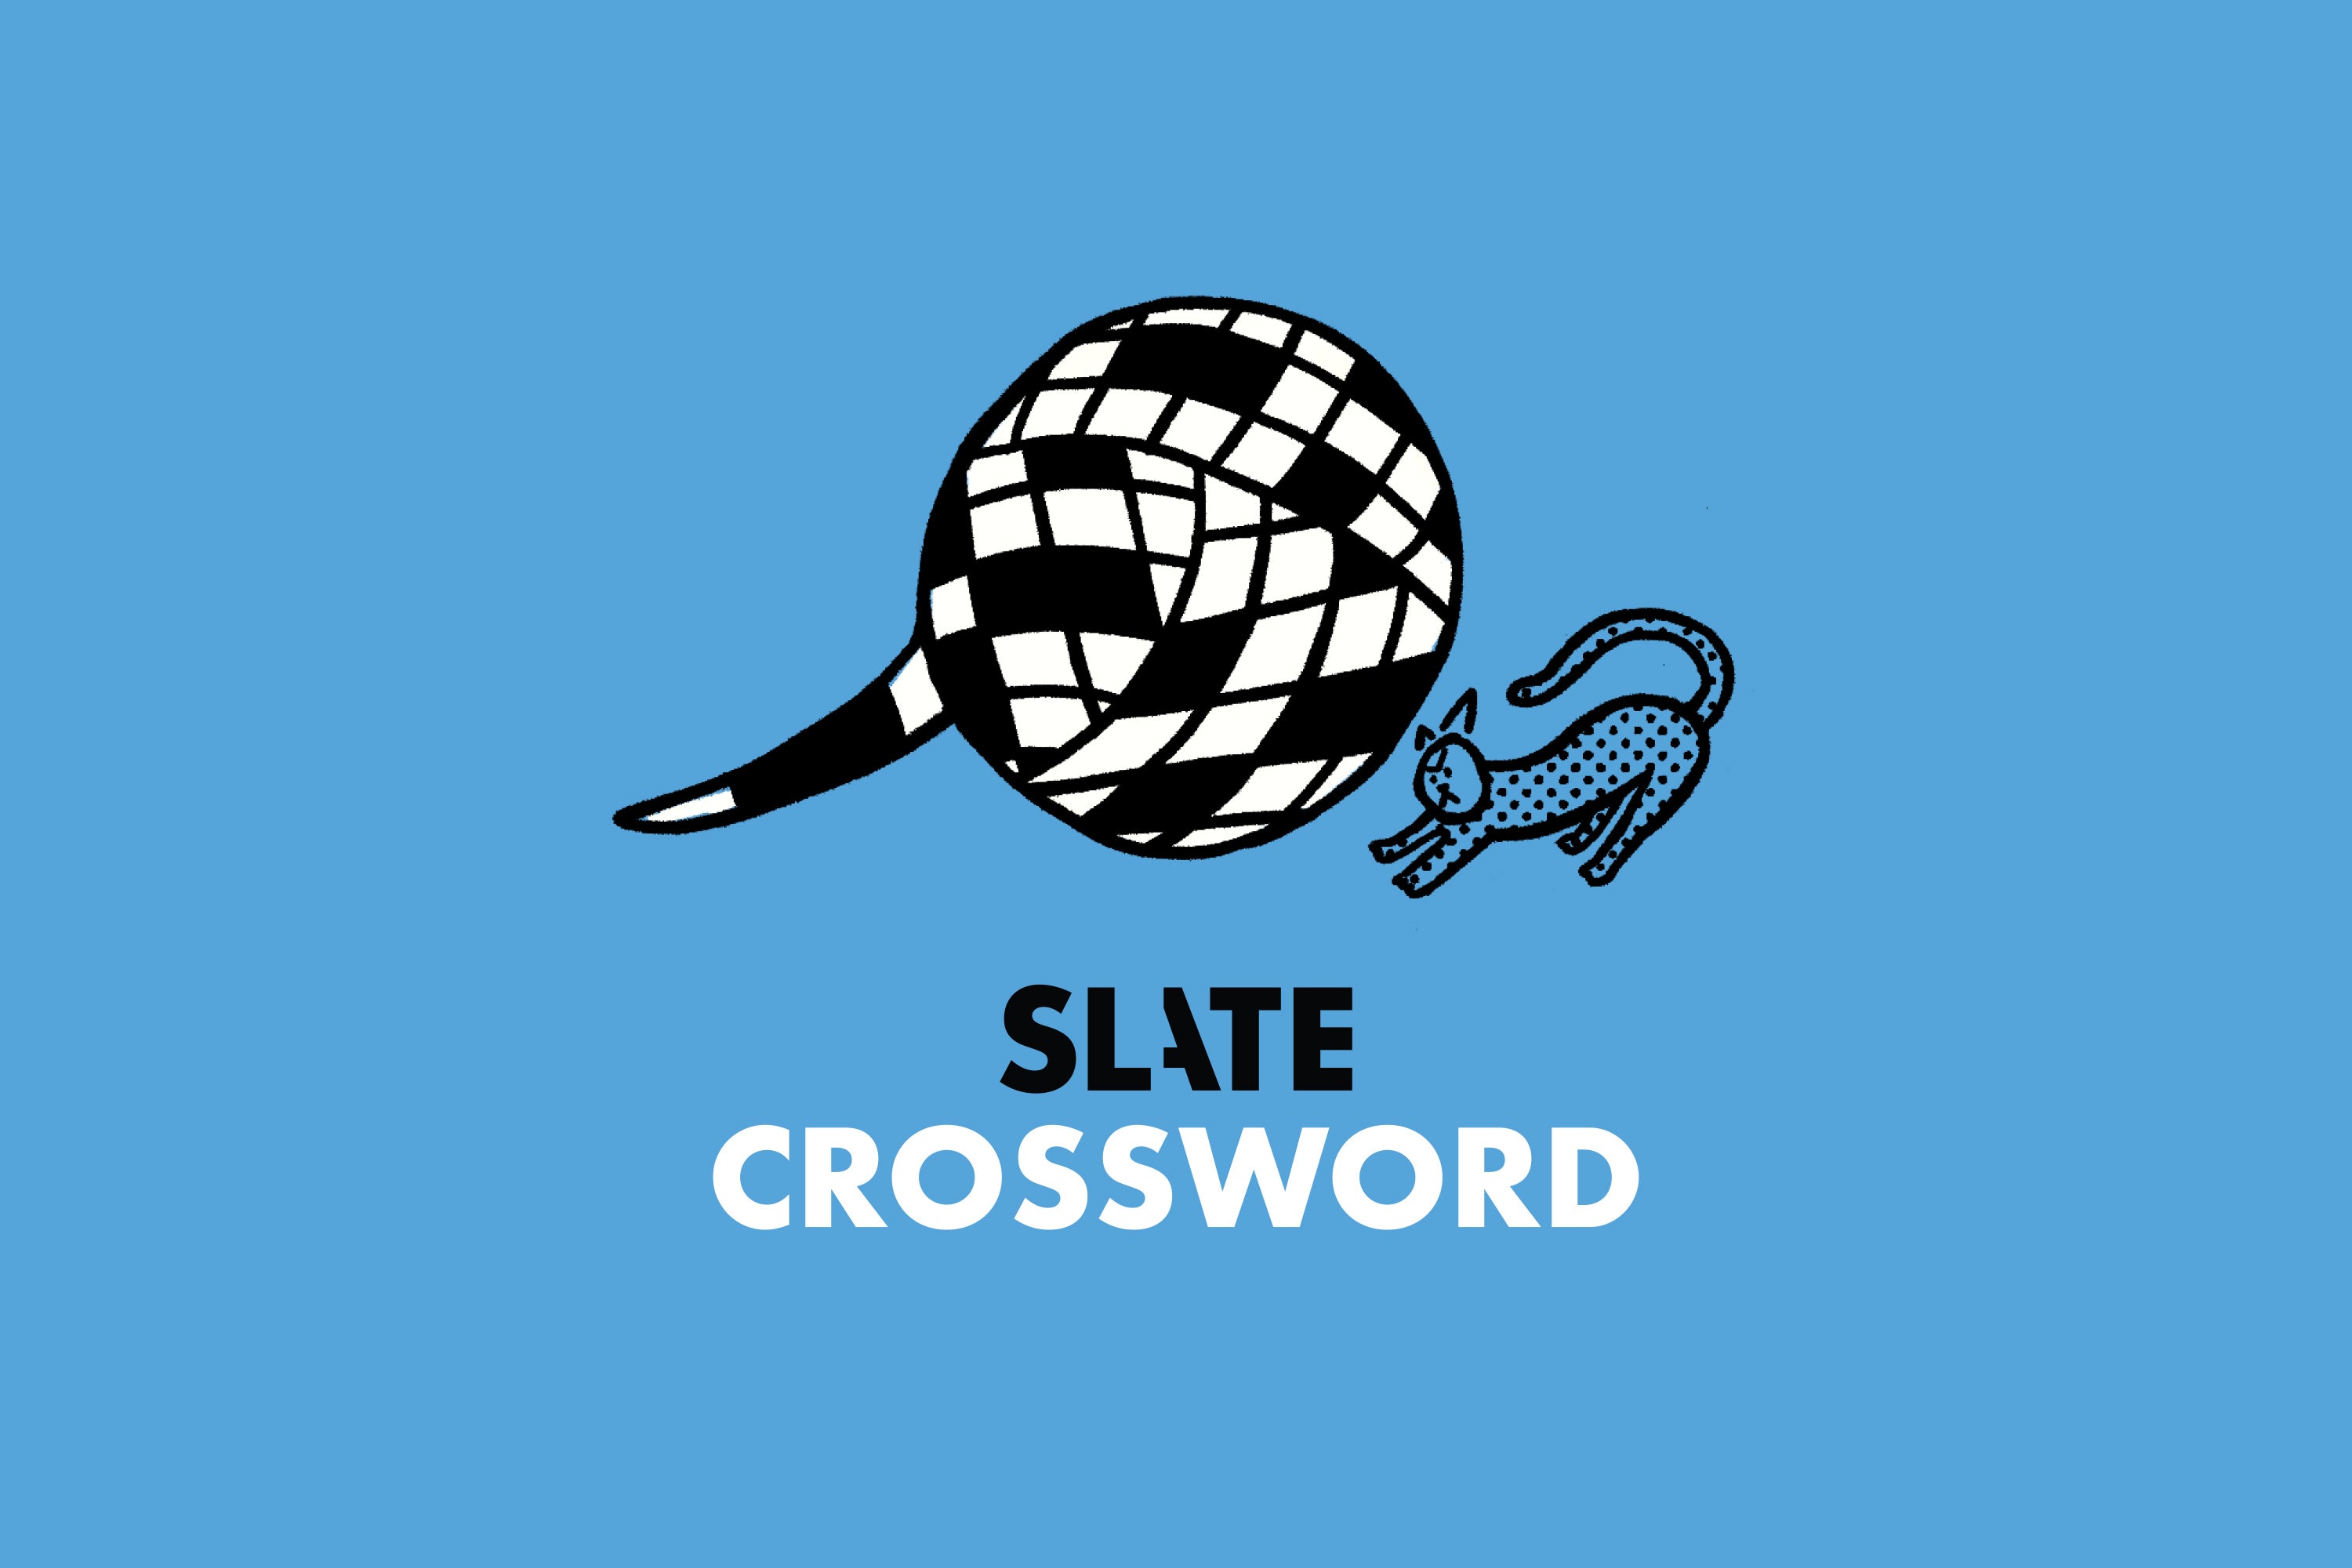 Slate Crossword: Get a Lode Of These! (Four Letters)